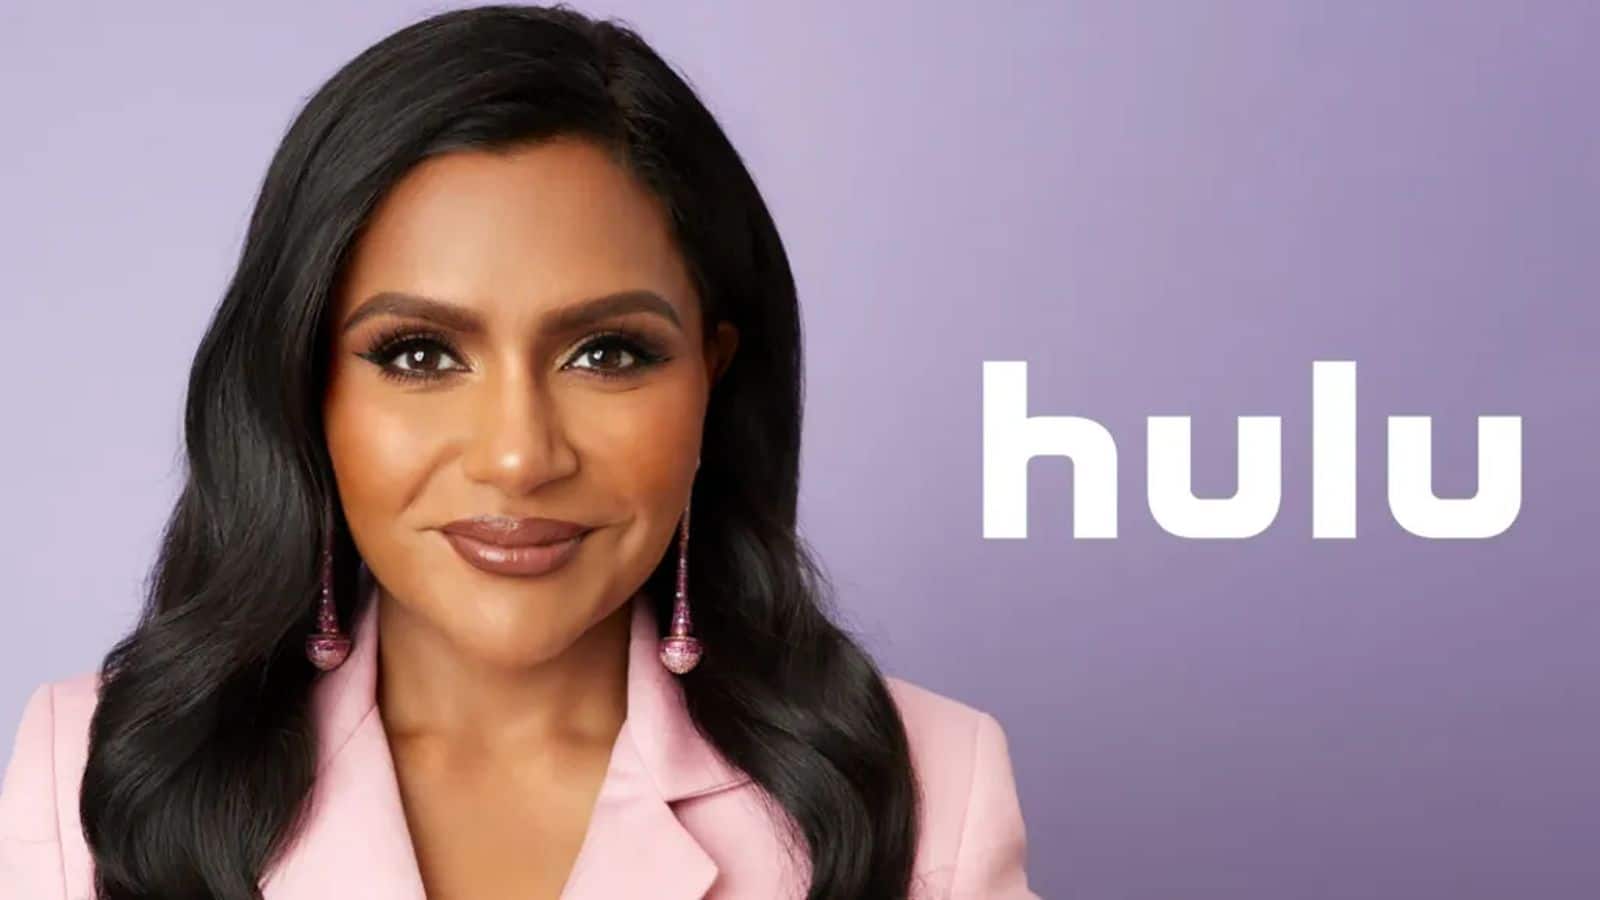 Hulu acquires broadcasting rights to Mindy Kaling's new comedy